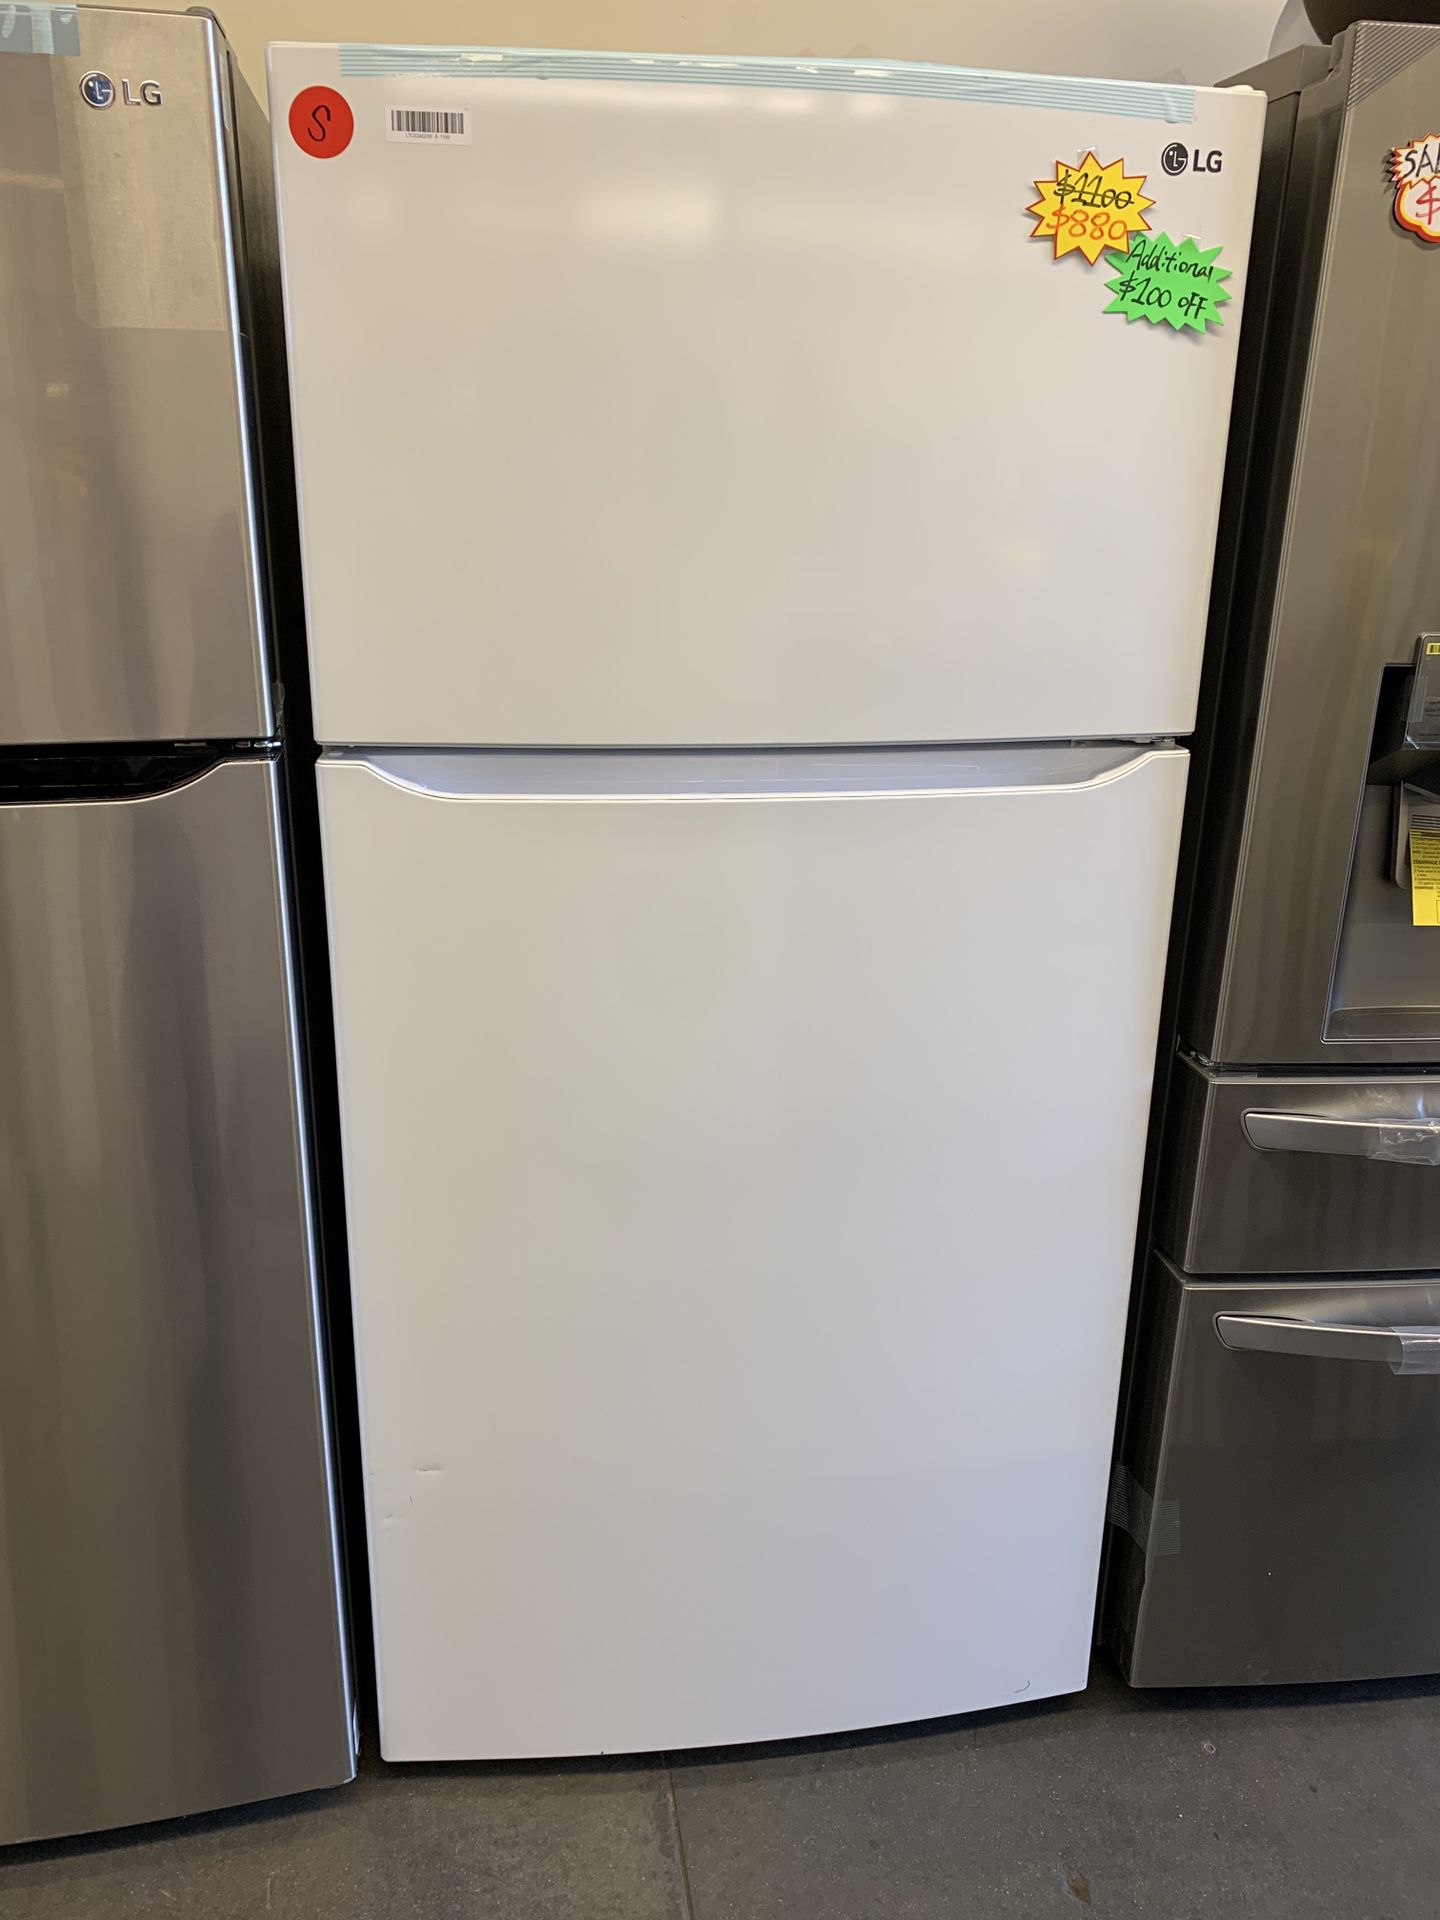 New Dented LG 23.8 CuFt White Top Freezer Refrigerator SALE ONLY $50 Down To Take It Home